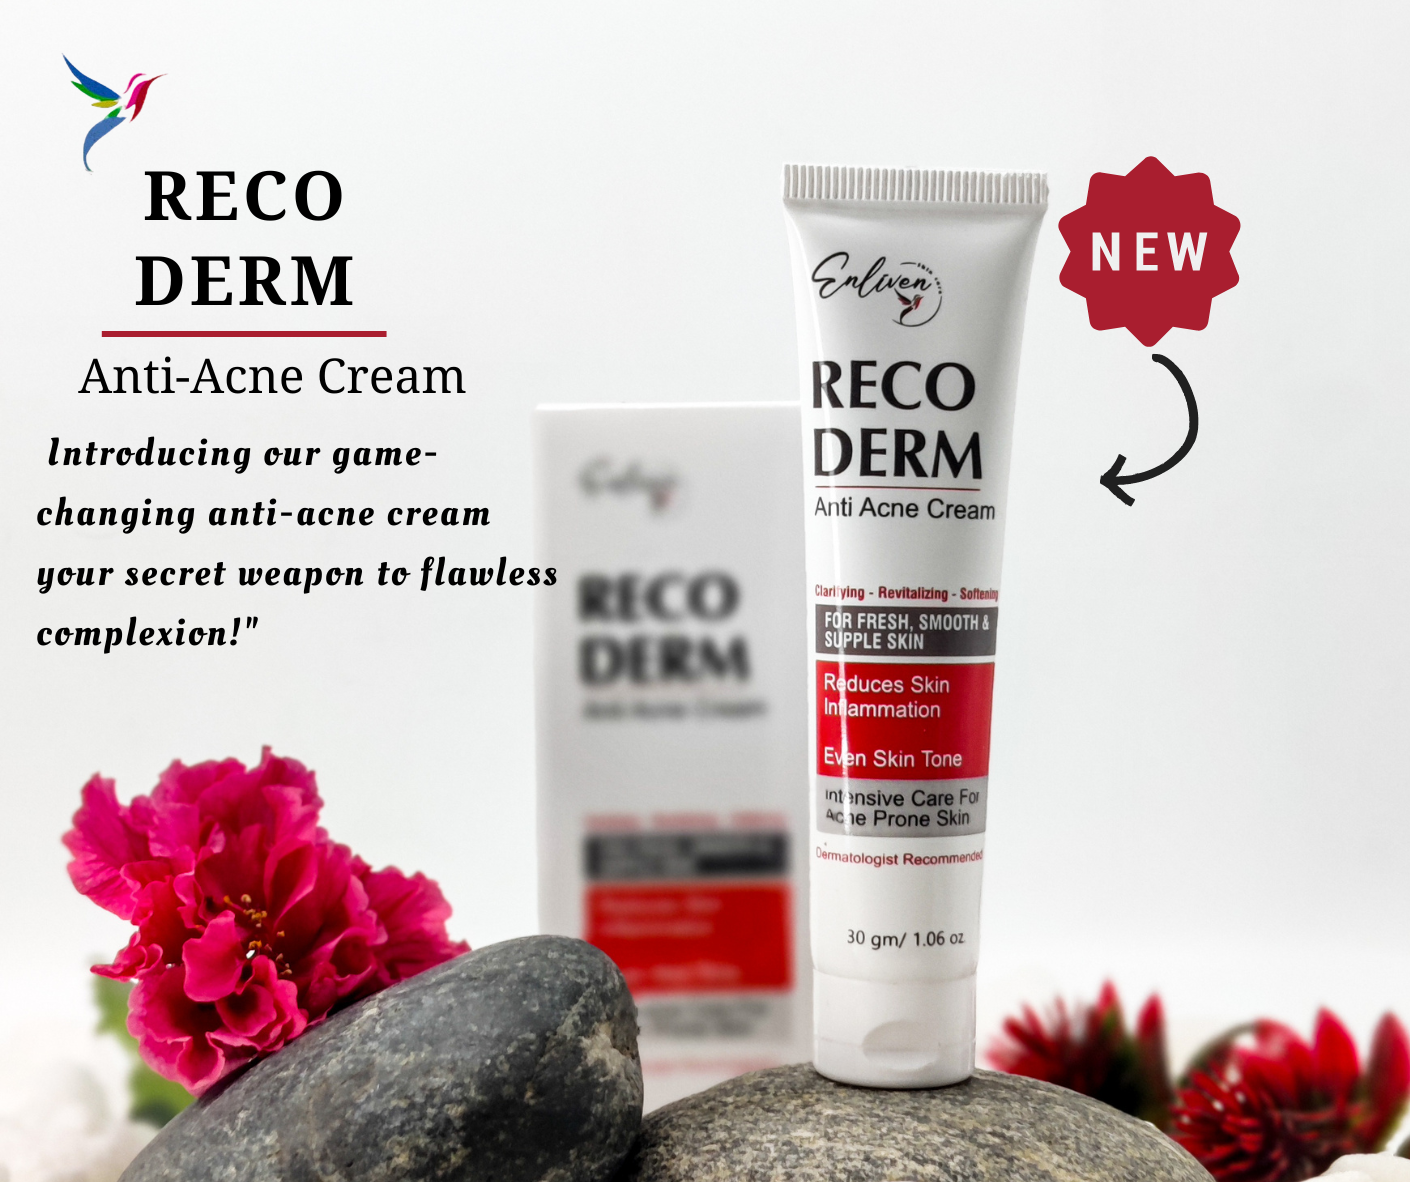 Everything you need to know about Recoderm Anti Acne Cream